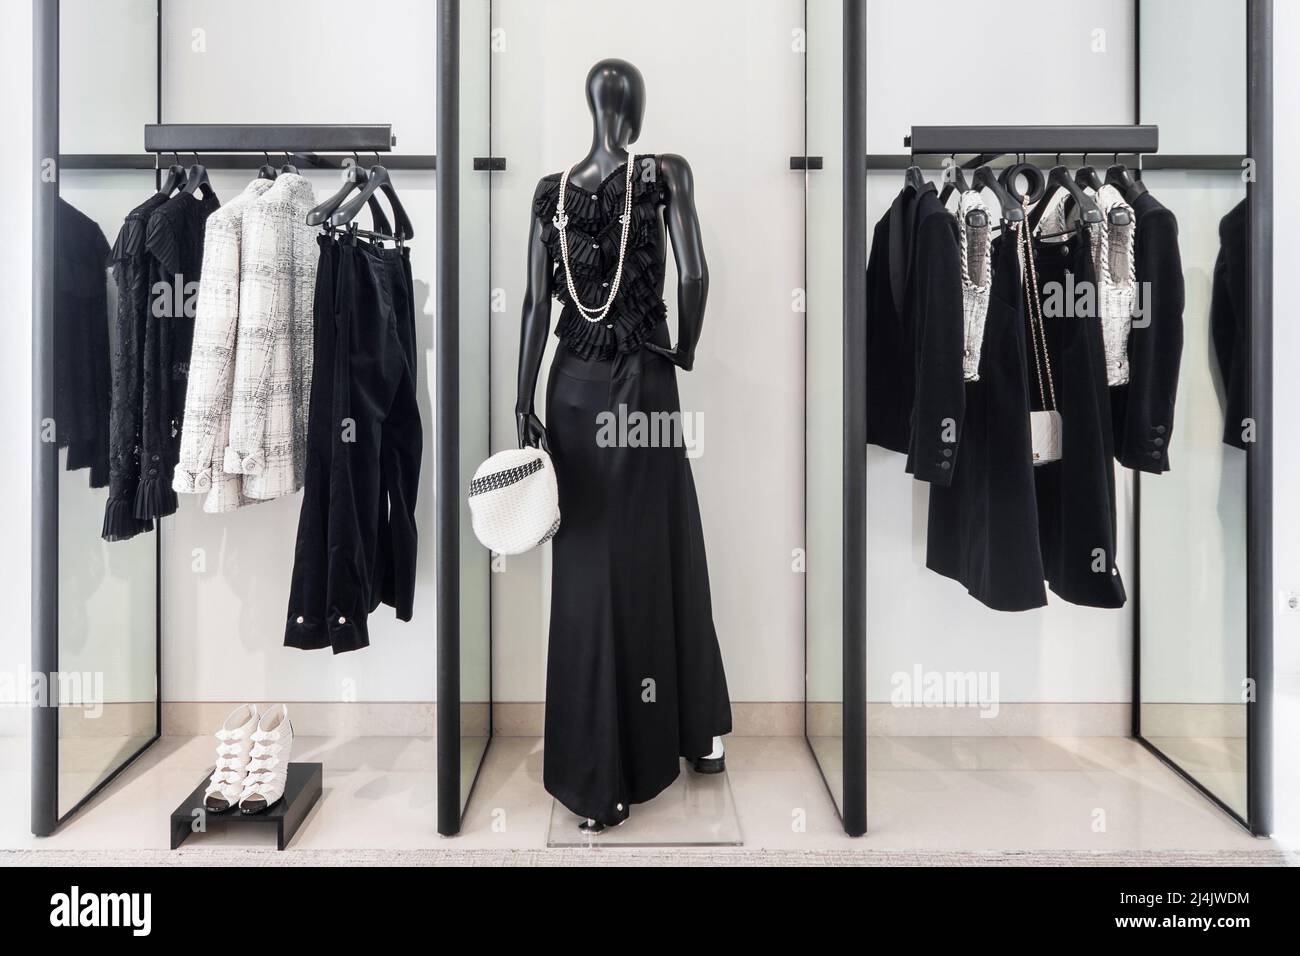 Kyiv, Ukraine, July 28, 2018. Interior of Chanel Boutique - luxury high fashion showroom. Hall of sale exposition. Stock Photo